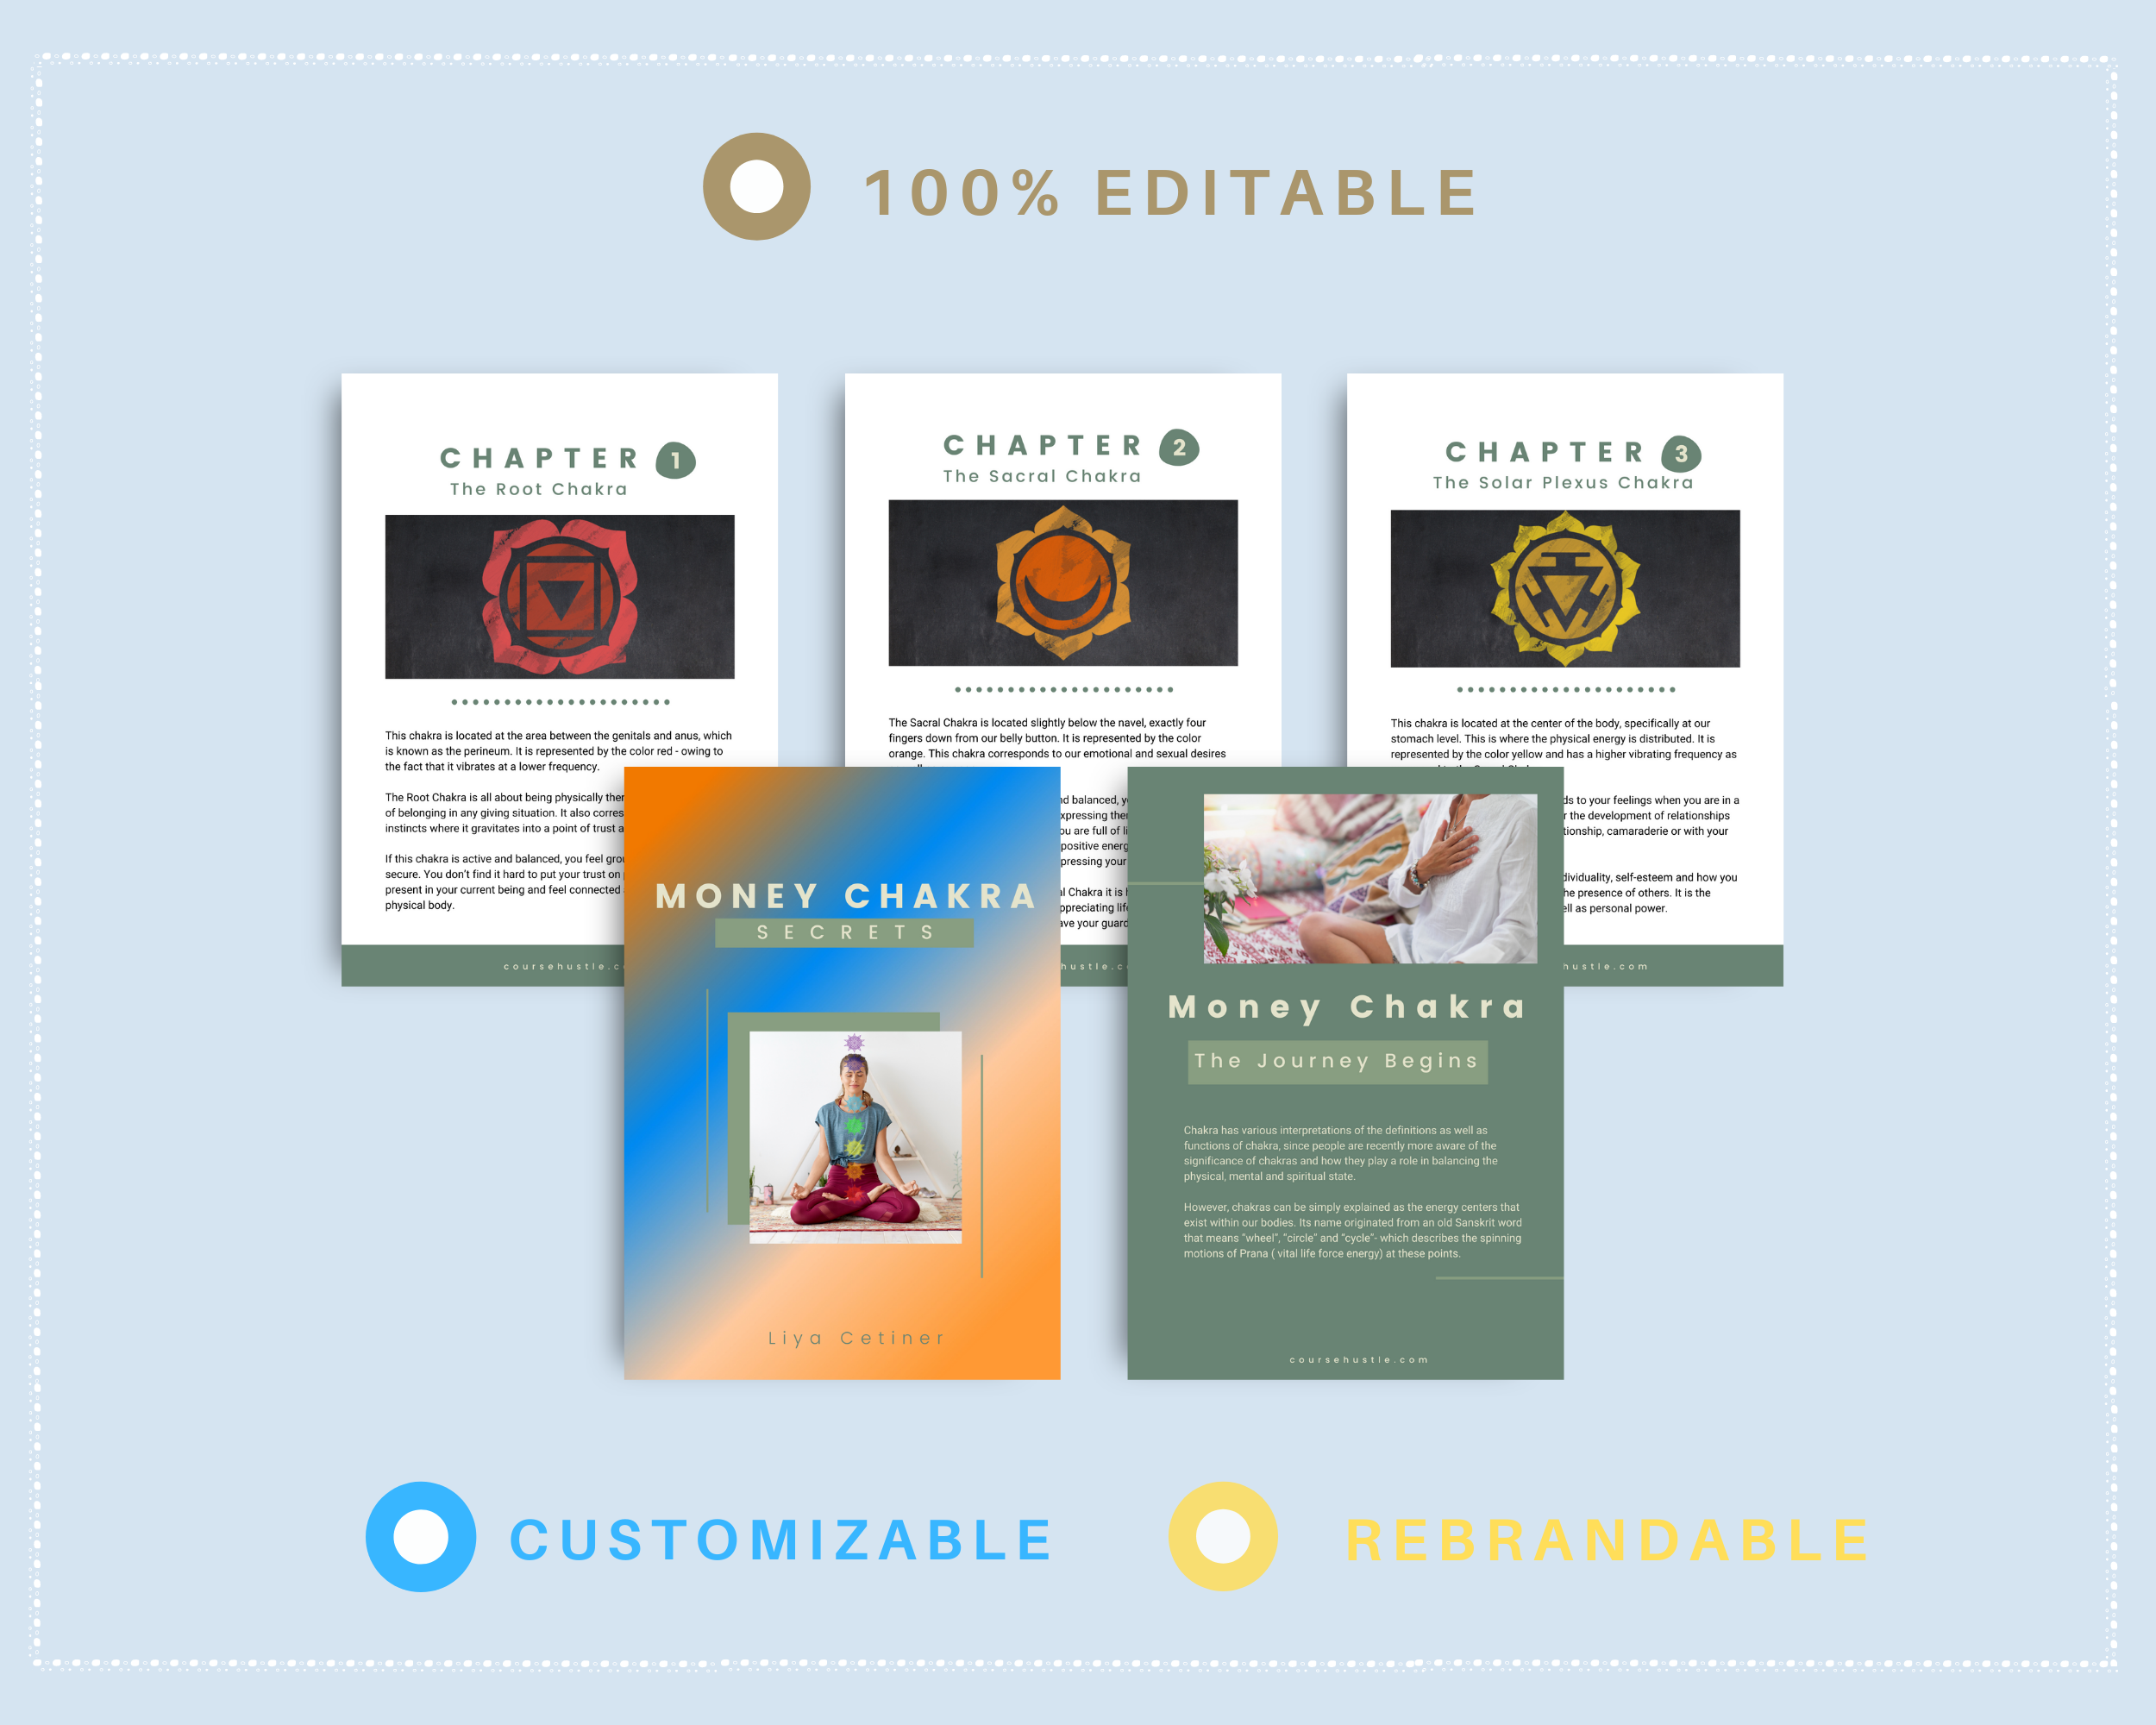 Done for You Money Chakra Playbook in Canva | Editable A4 Size Canva Template